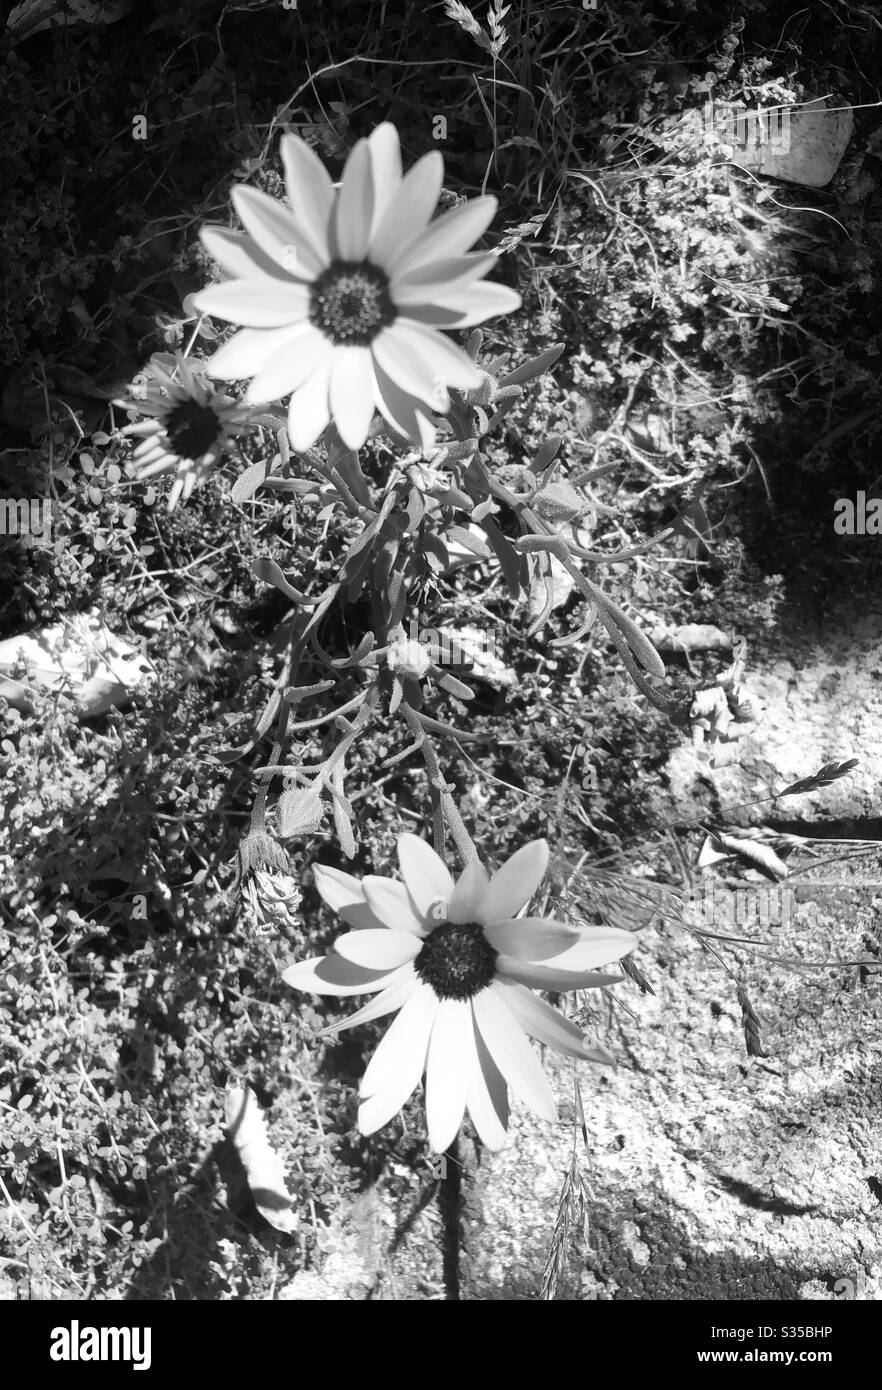 Black white, closeup, downward angle, yellow blossoms, daisy like, desert living,late morning light, nature, natural, flowers, weeds , unwanted plants Stock Photo